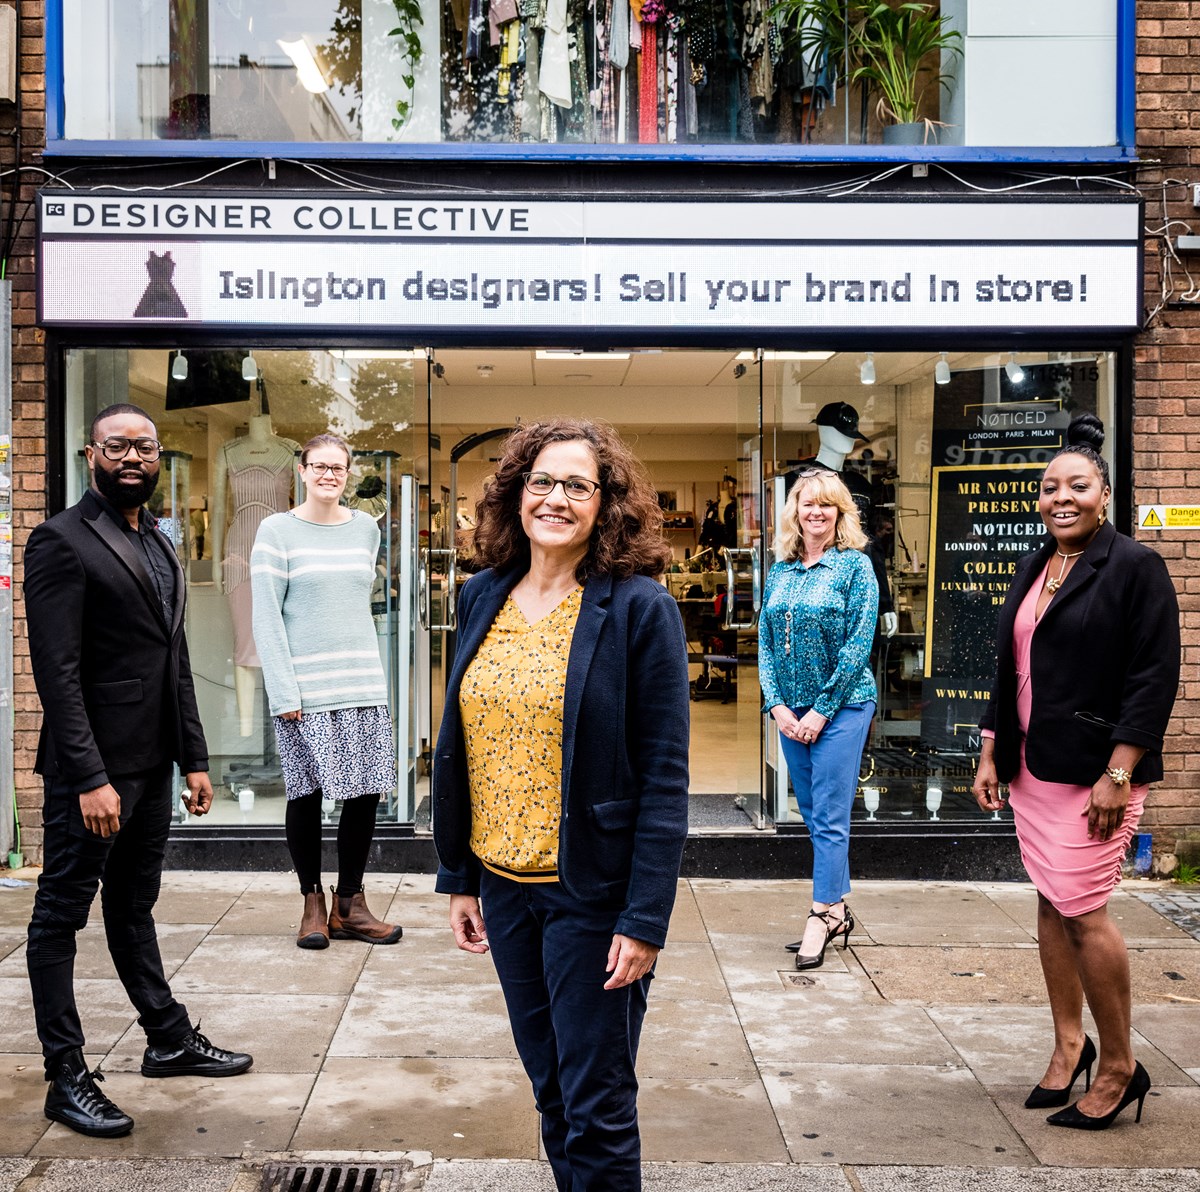 Outside the FC Designer Collective store,(from left) Boaz Otudeko, Sarah Hill, Cllr Asima Shaikh, Fashion-Enter CEO Jenny Holloway and Tricia Blake-2